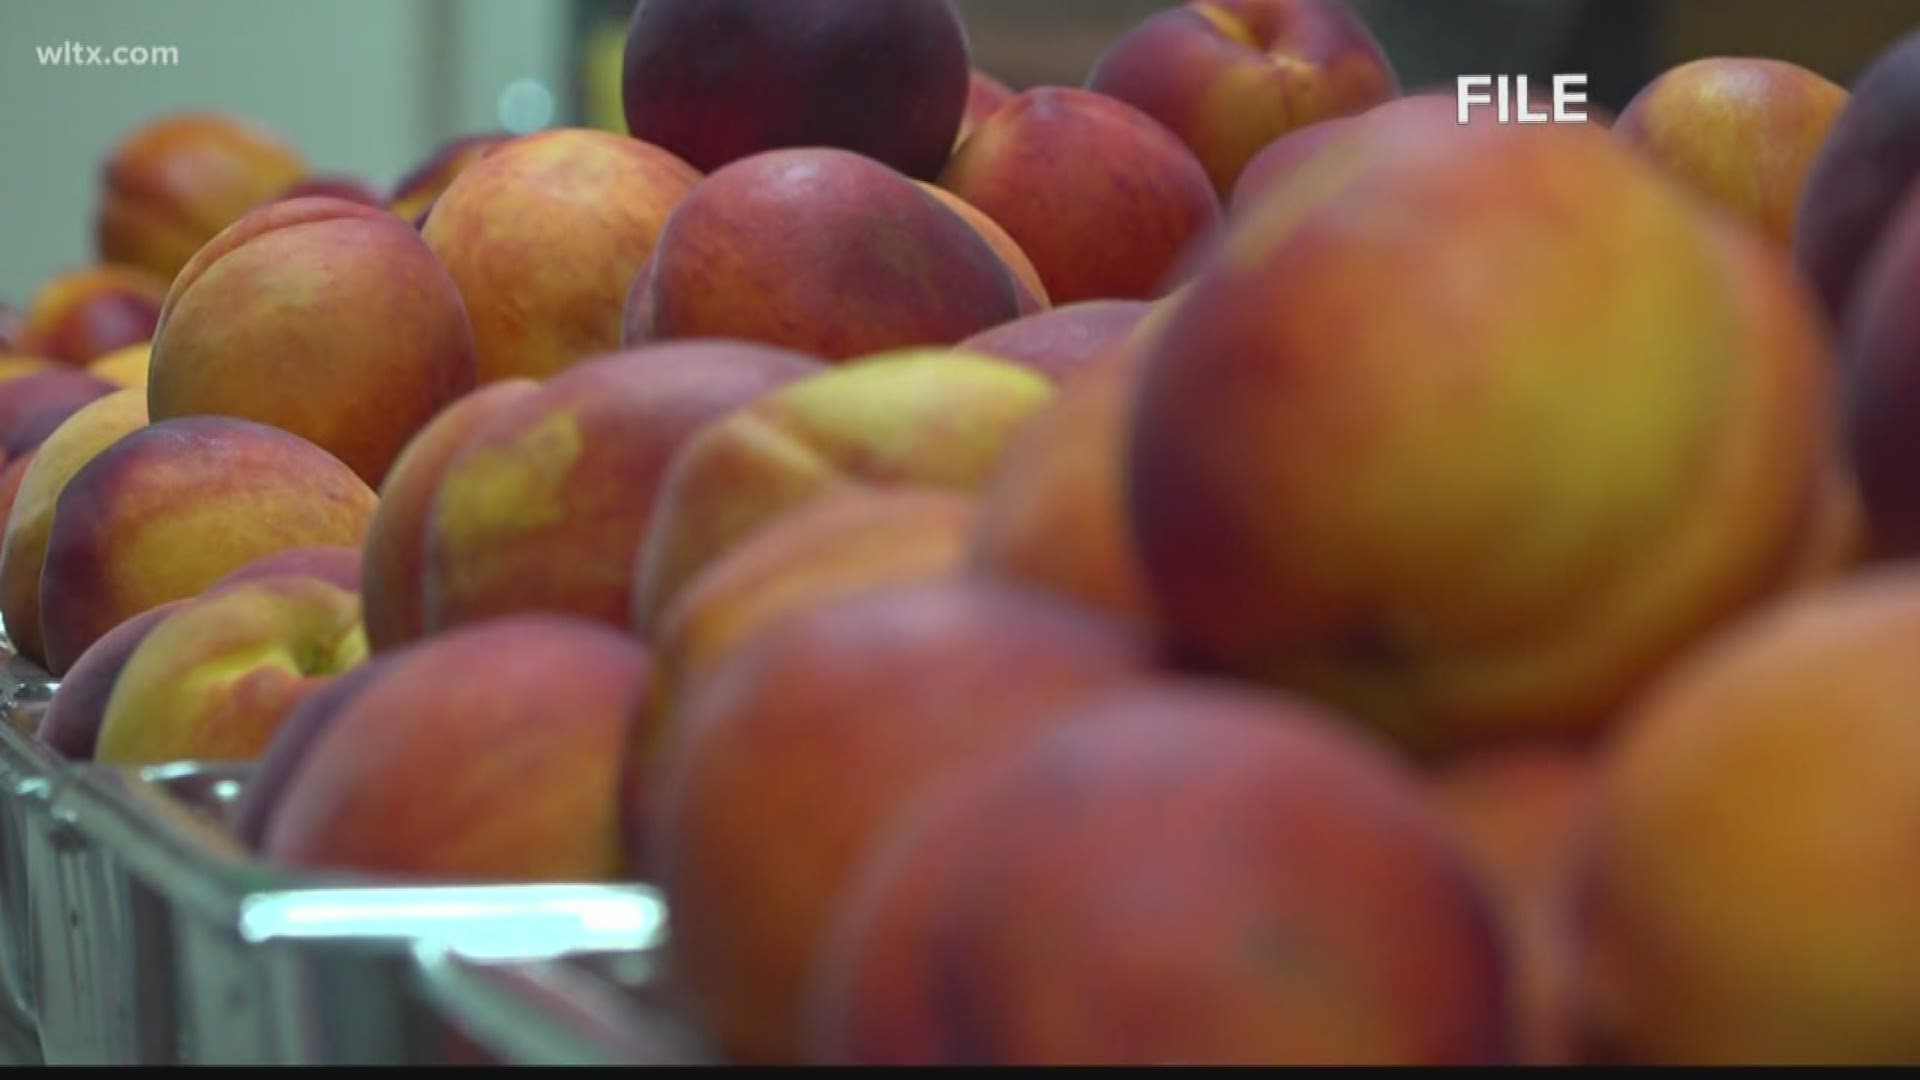 February is on quite the warm note, and while the spring-like weather is great for outdoor activities, can cause problems for one of the state's cash crops, peaches